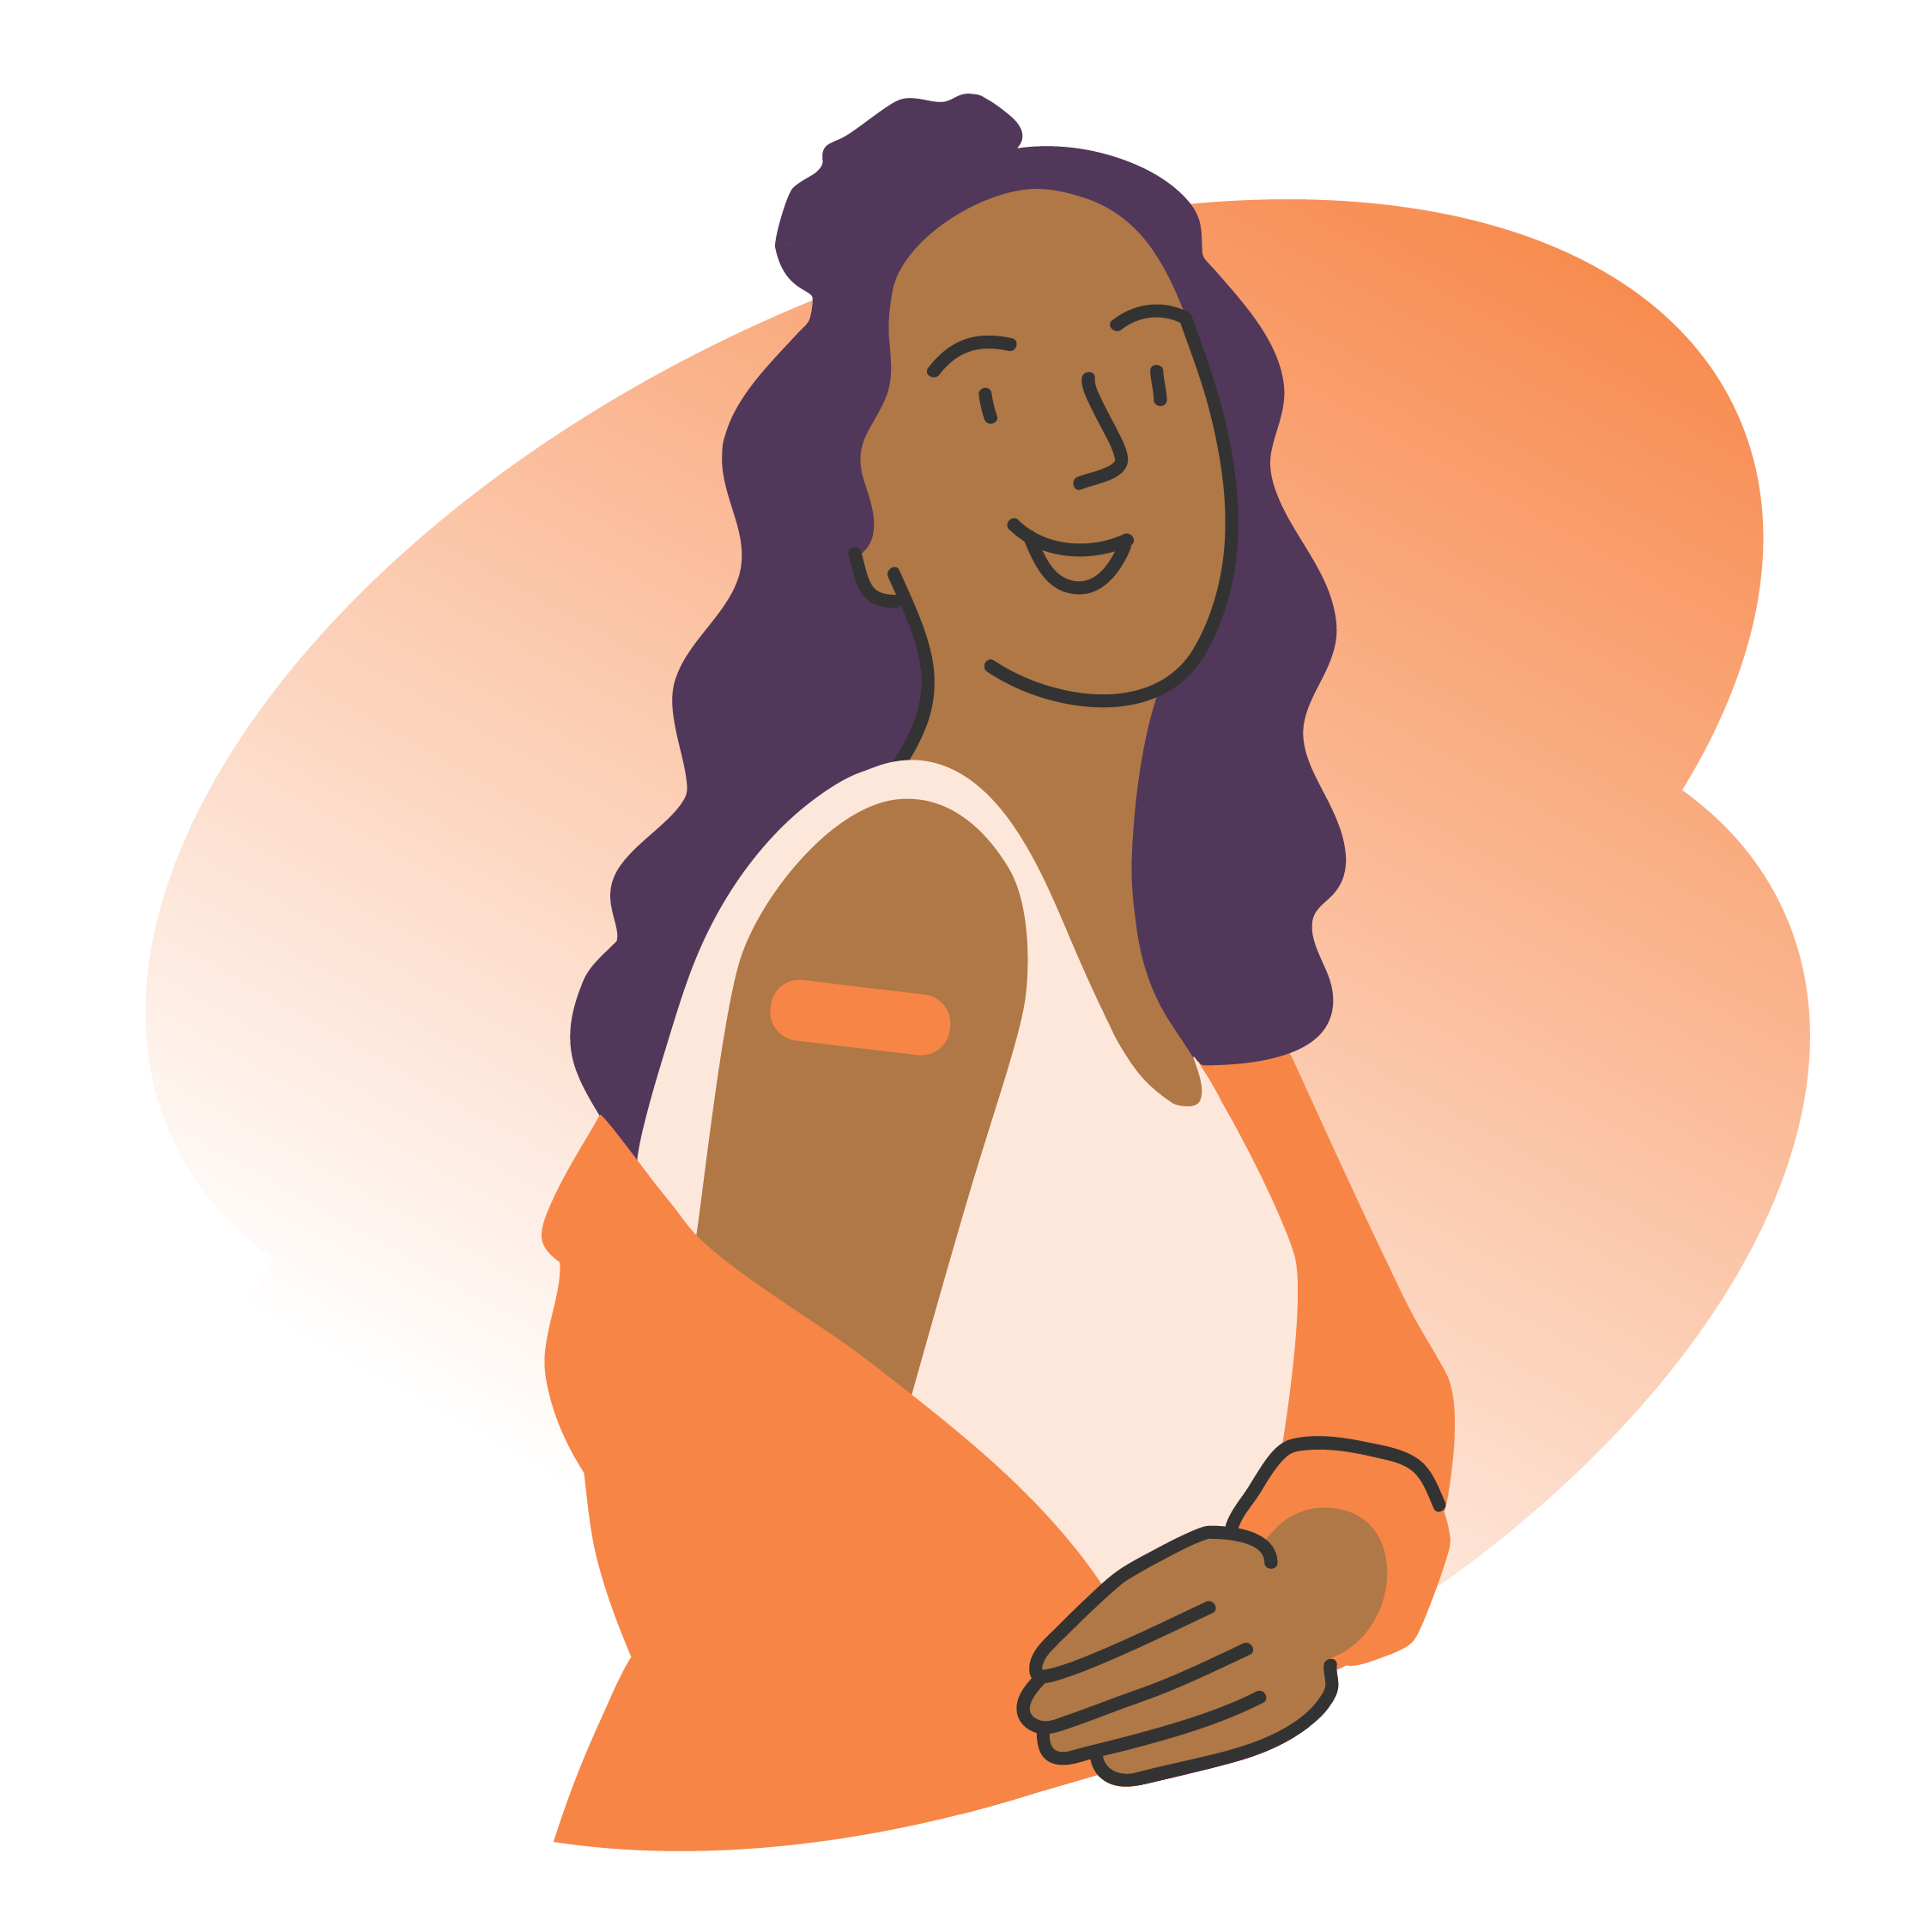 Illustration of a person smiling and showing off a bandage on their arm